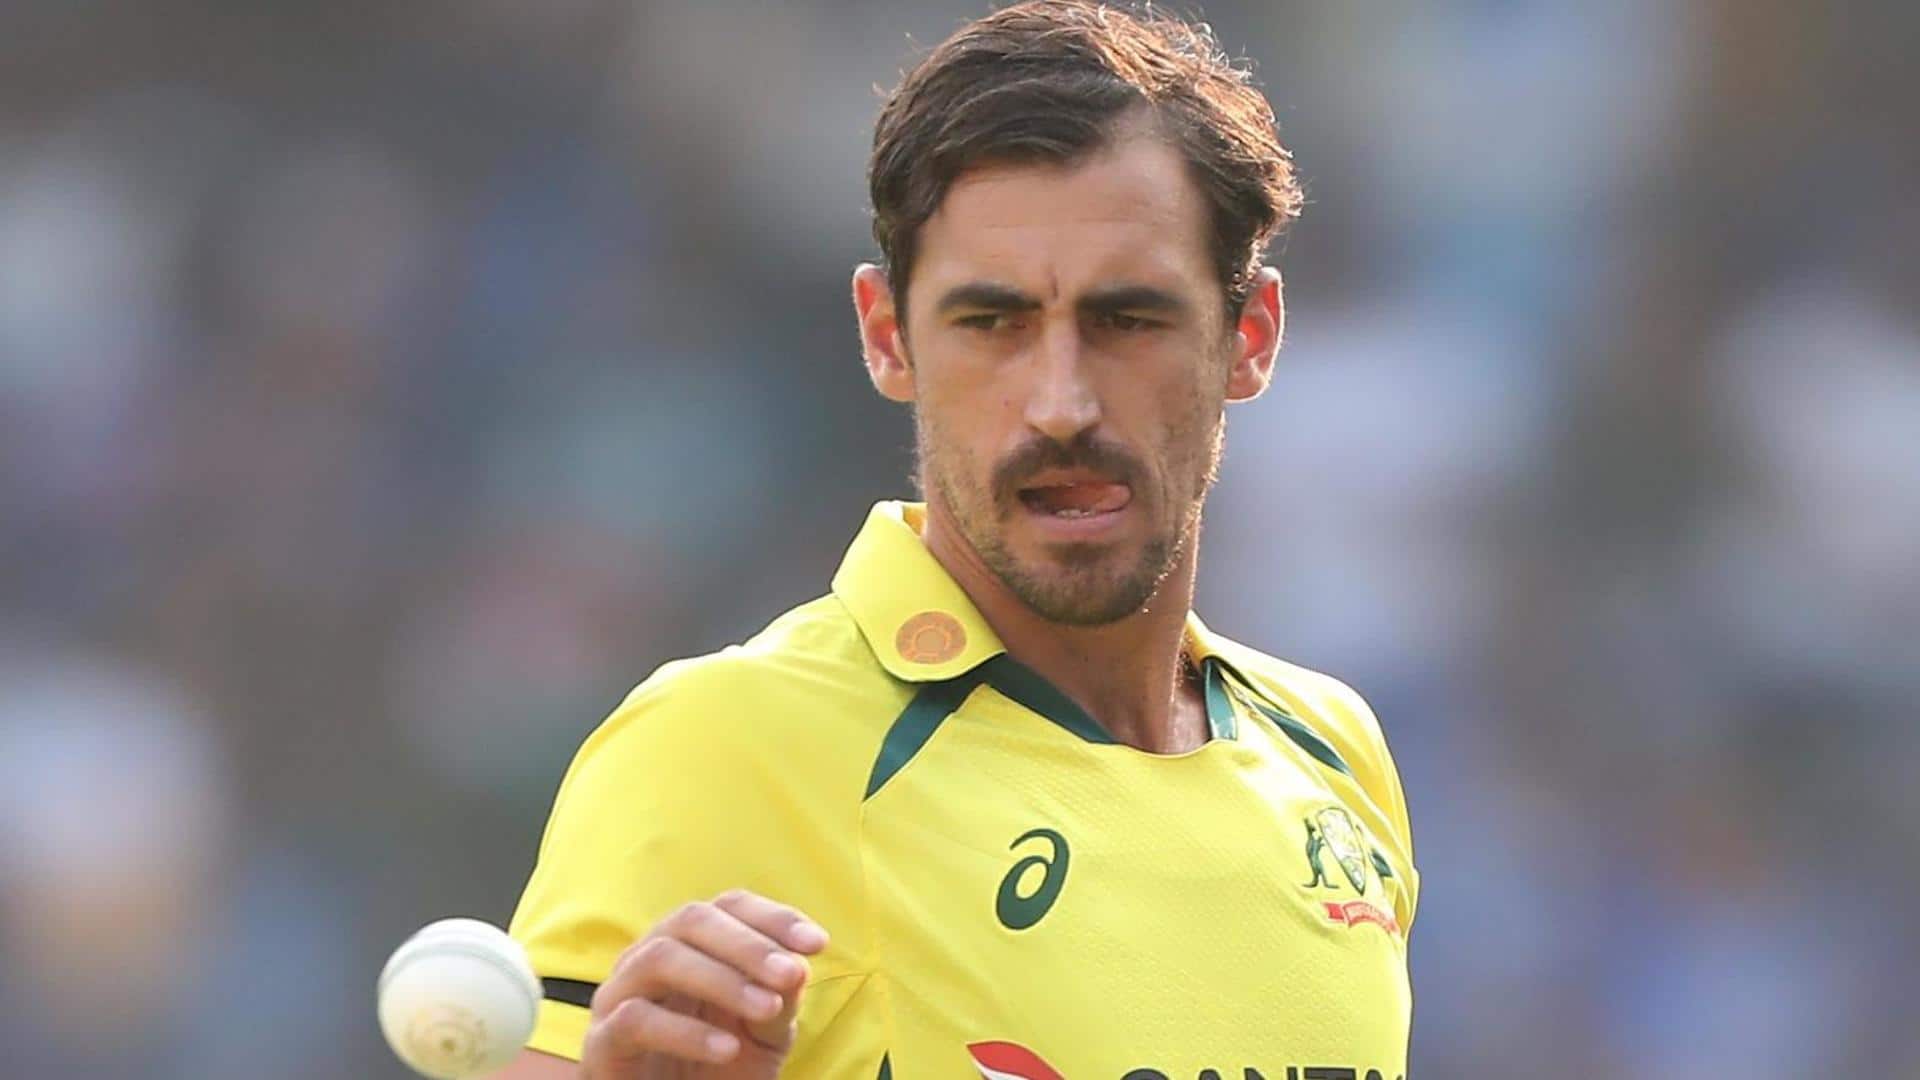 IND vs AUS: Mitchell Starc stars with 3/49 in defeat